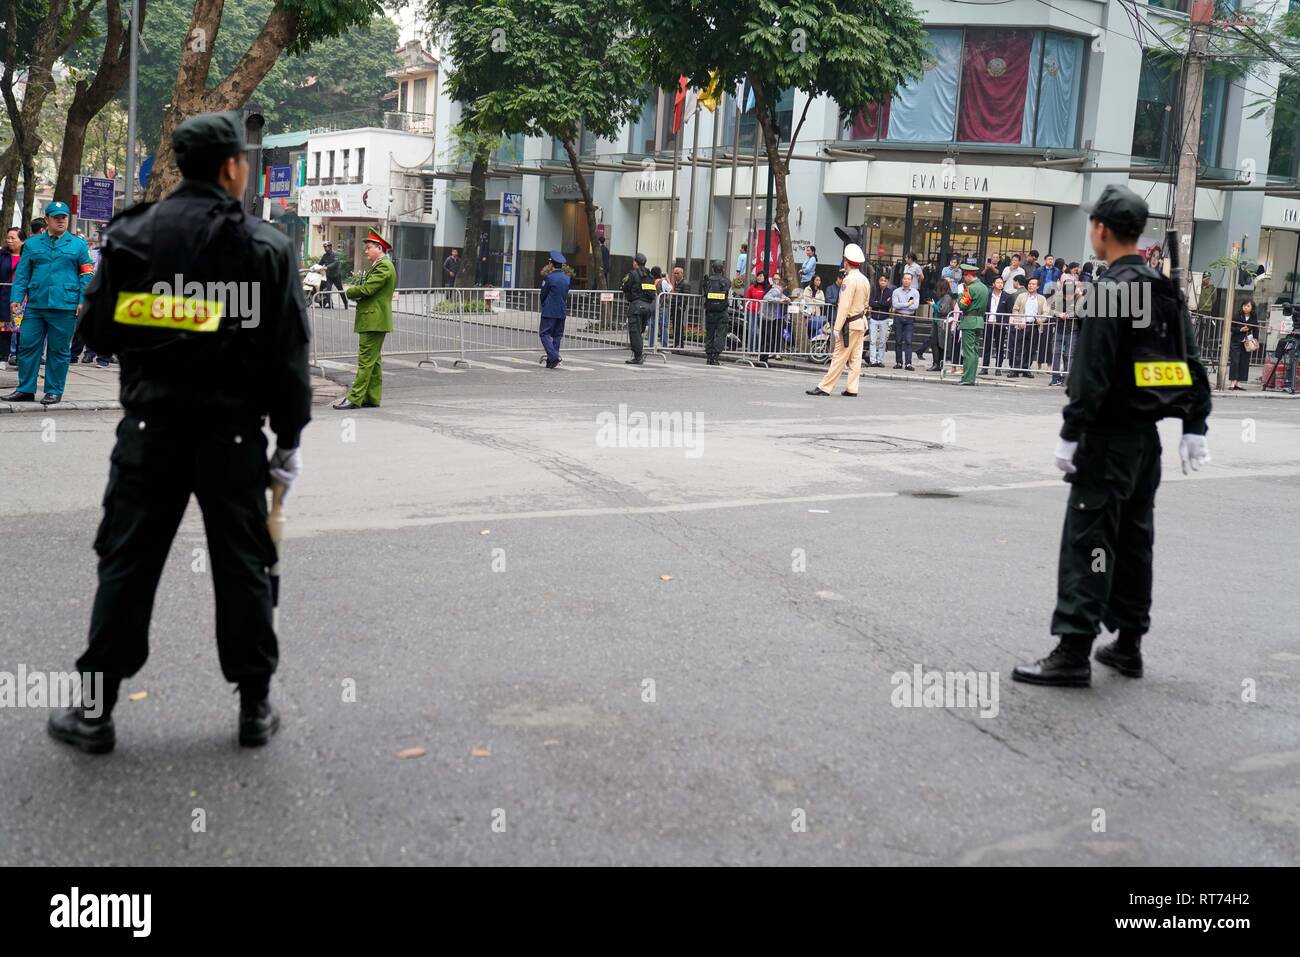 Hanoi, Vietnam. 28th Feb, 2019. February 28, 2019 - Hanoi, Vietnam - Security personnel block a street to make way for the motorcade of U.S. President Donald Trump heading to the Sofitel Legend Metropole Hanoi where he will participate in a series of meetings during the second North Korea-U.S. Summit in the capital city of Hanoi, Vietnam. Credit: Christopher Jue/ZUMA Wire/Alamy Live News Stock Photo